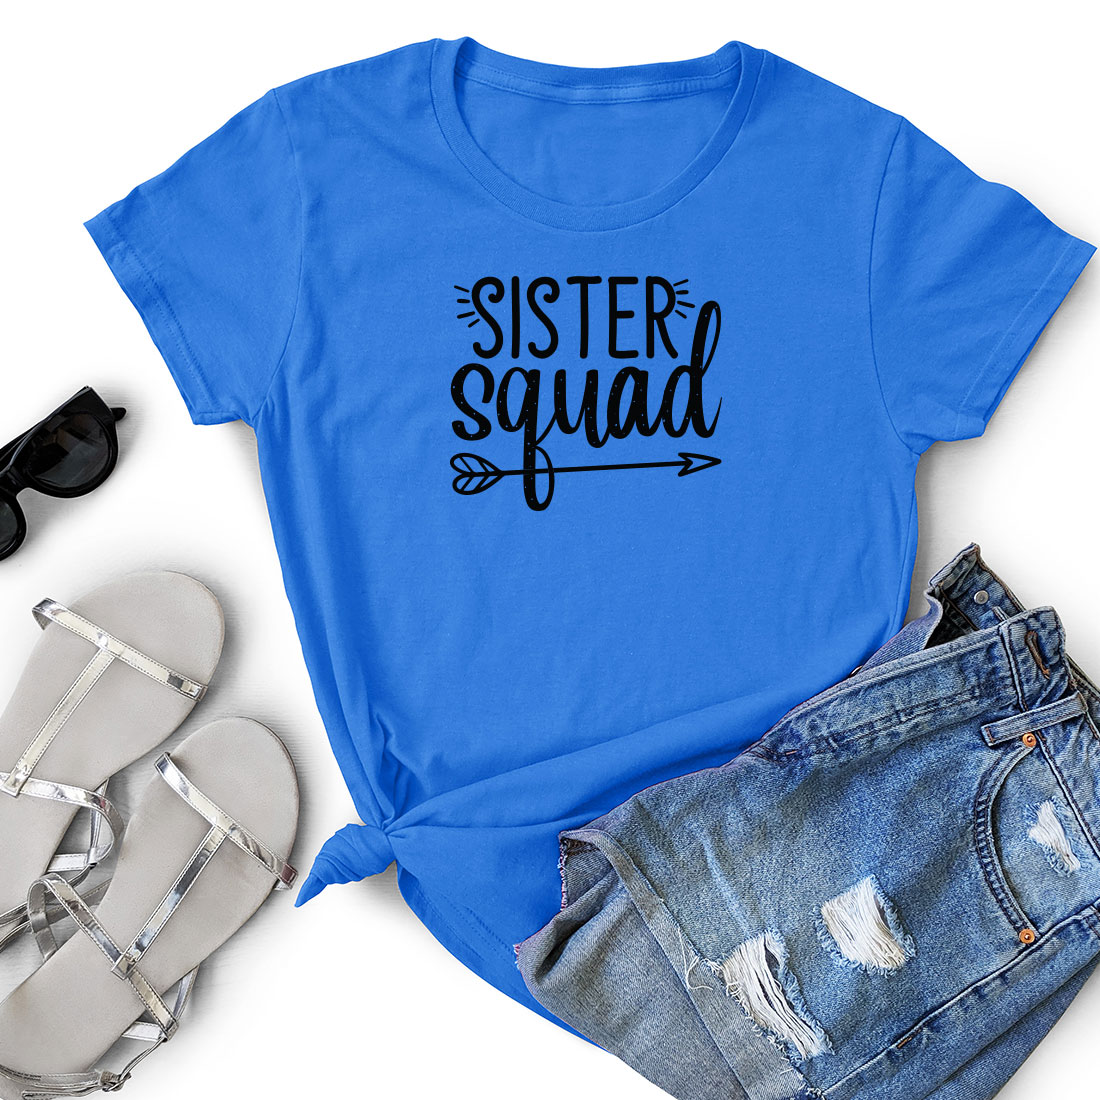 Blue shirt that says sister squad next to a pair of shorts.